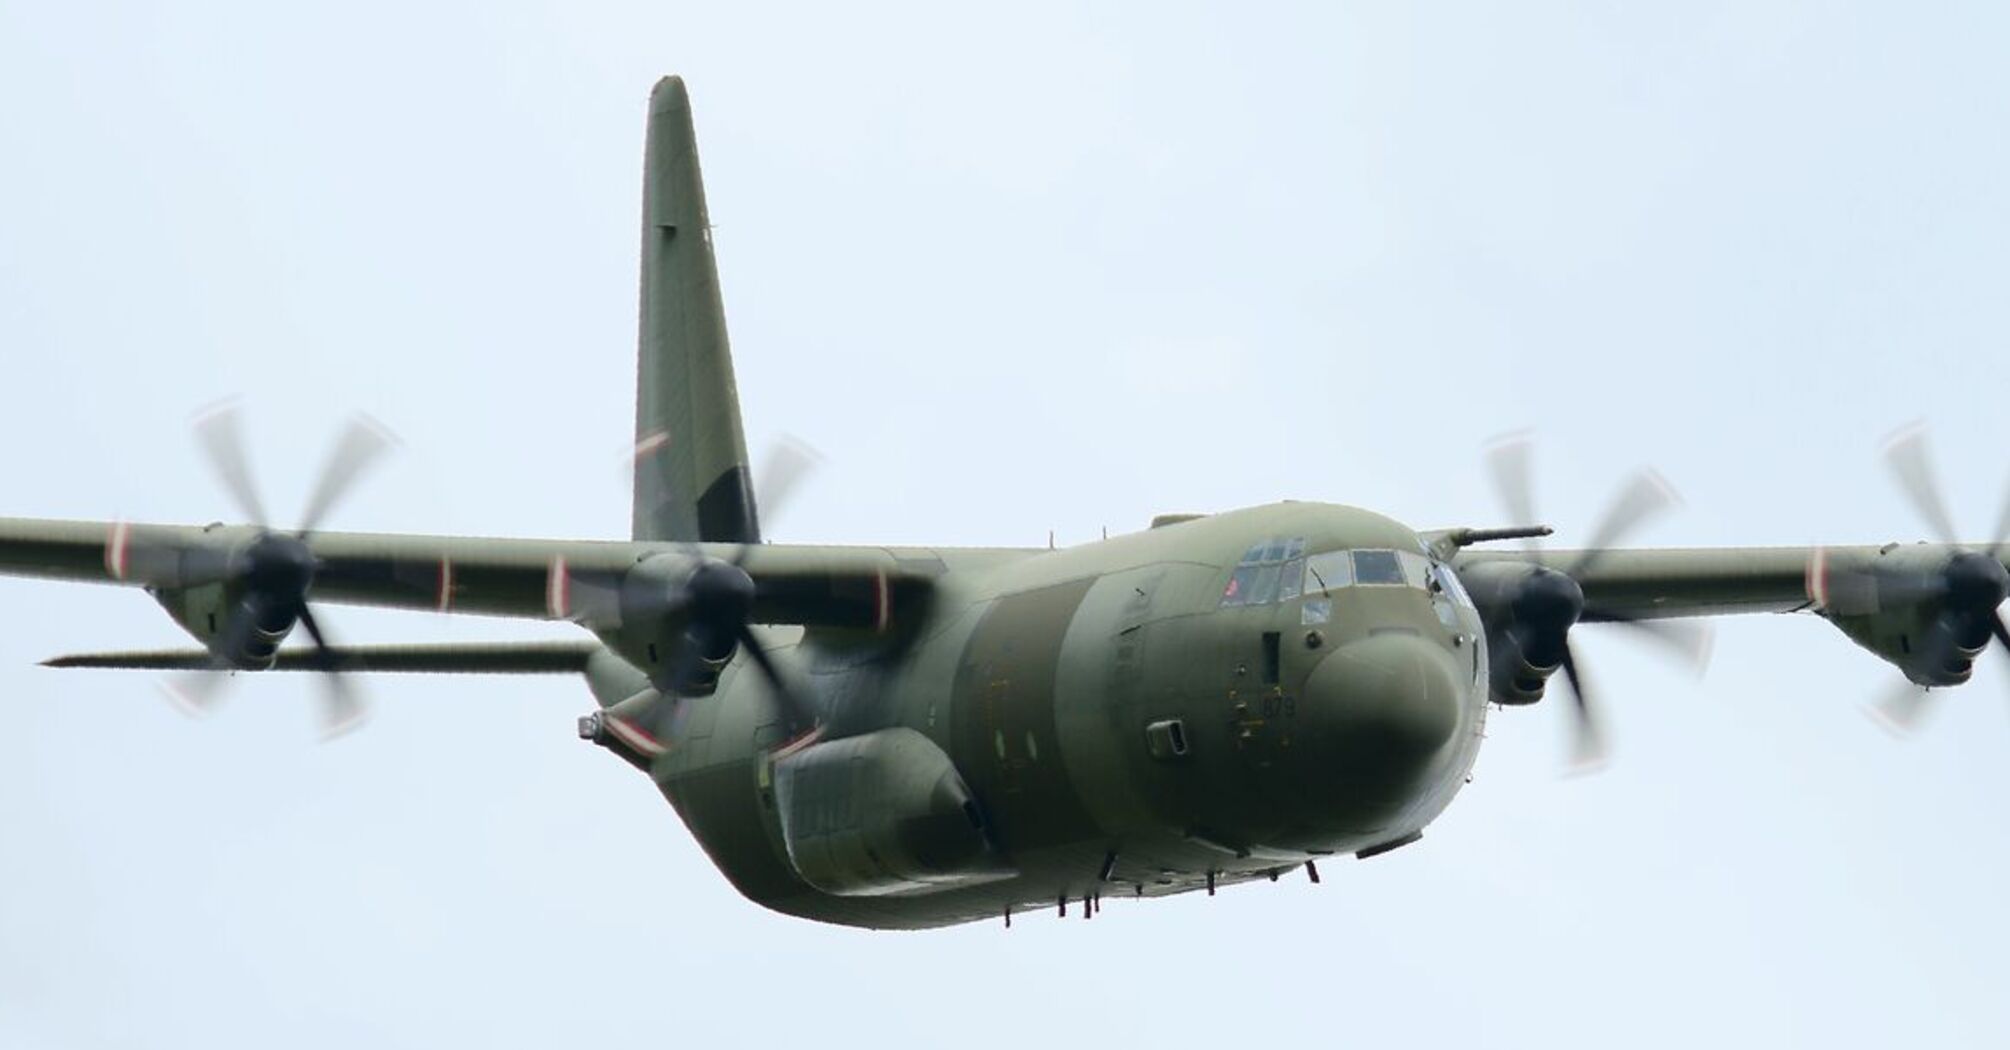 C-130 military transport aircraft in flight against a clear sky